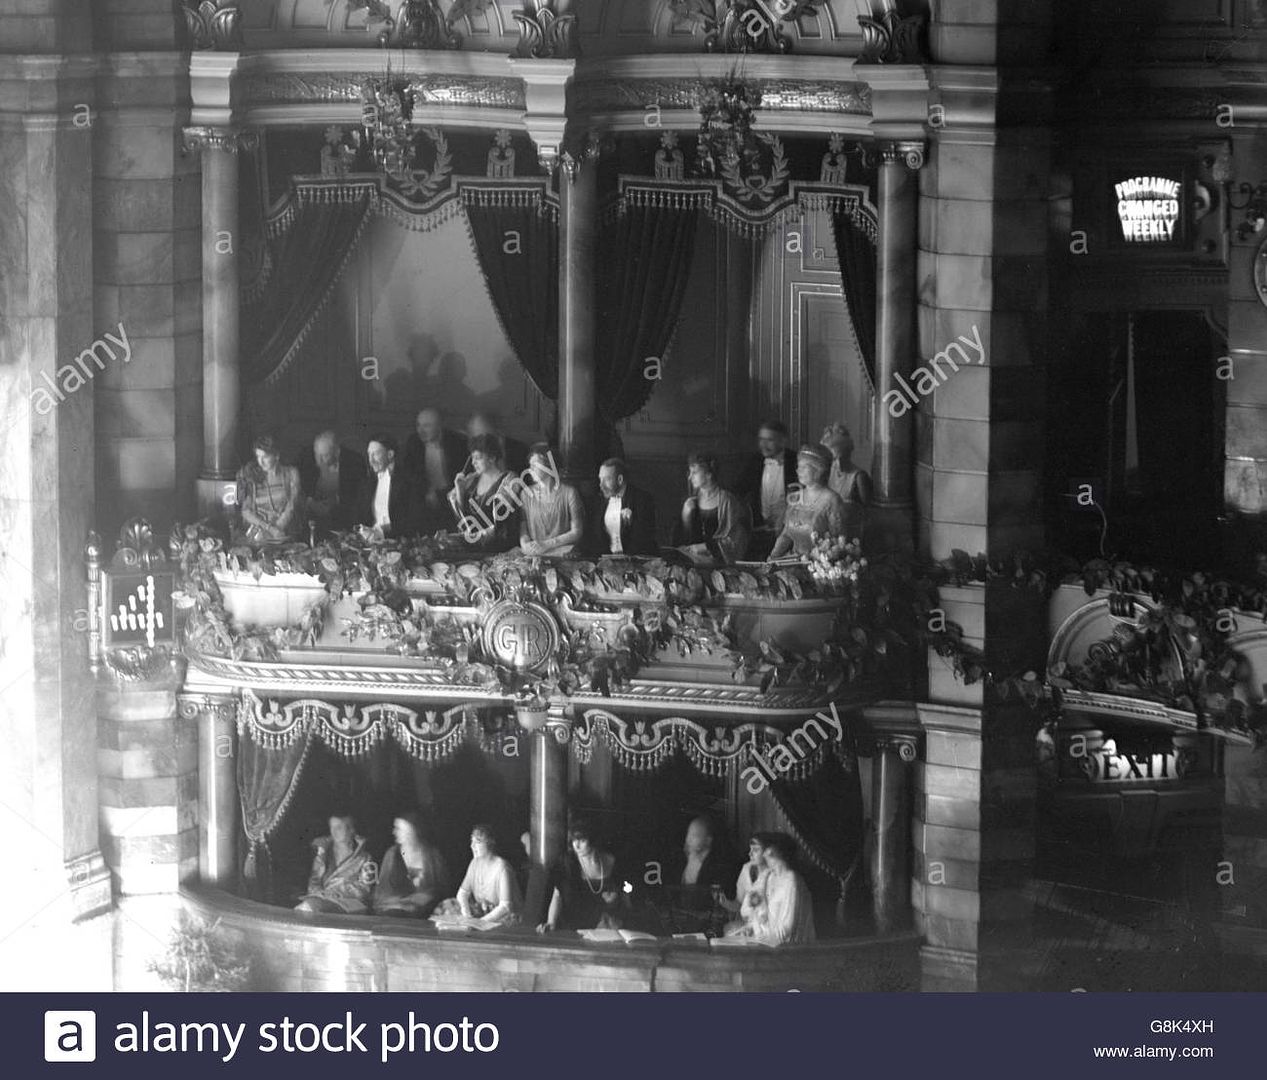 Tiara to be identified 13 Dec 1923 Variety Artists Benefit Fund royal-performance-london-coliseum-G8K4XH_zpszraadeoy